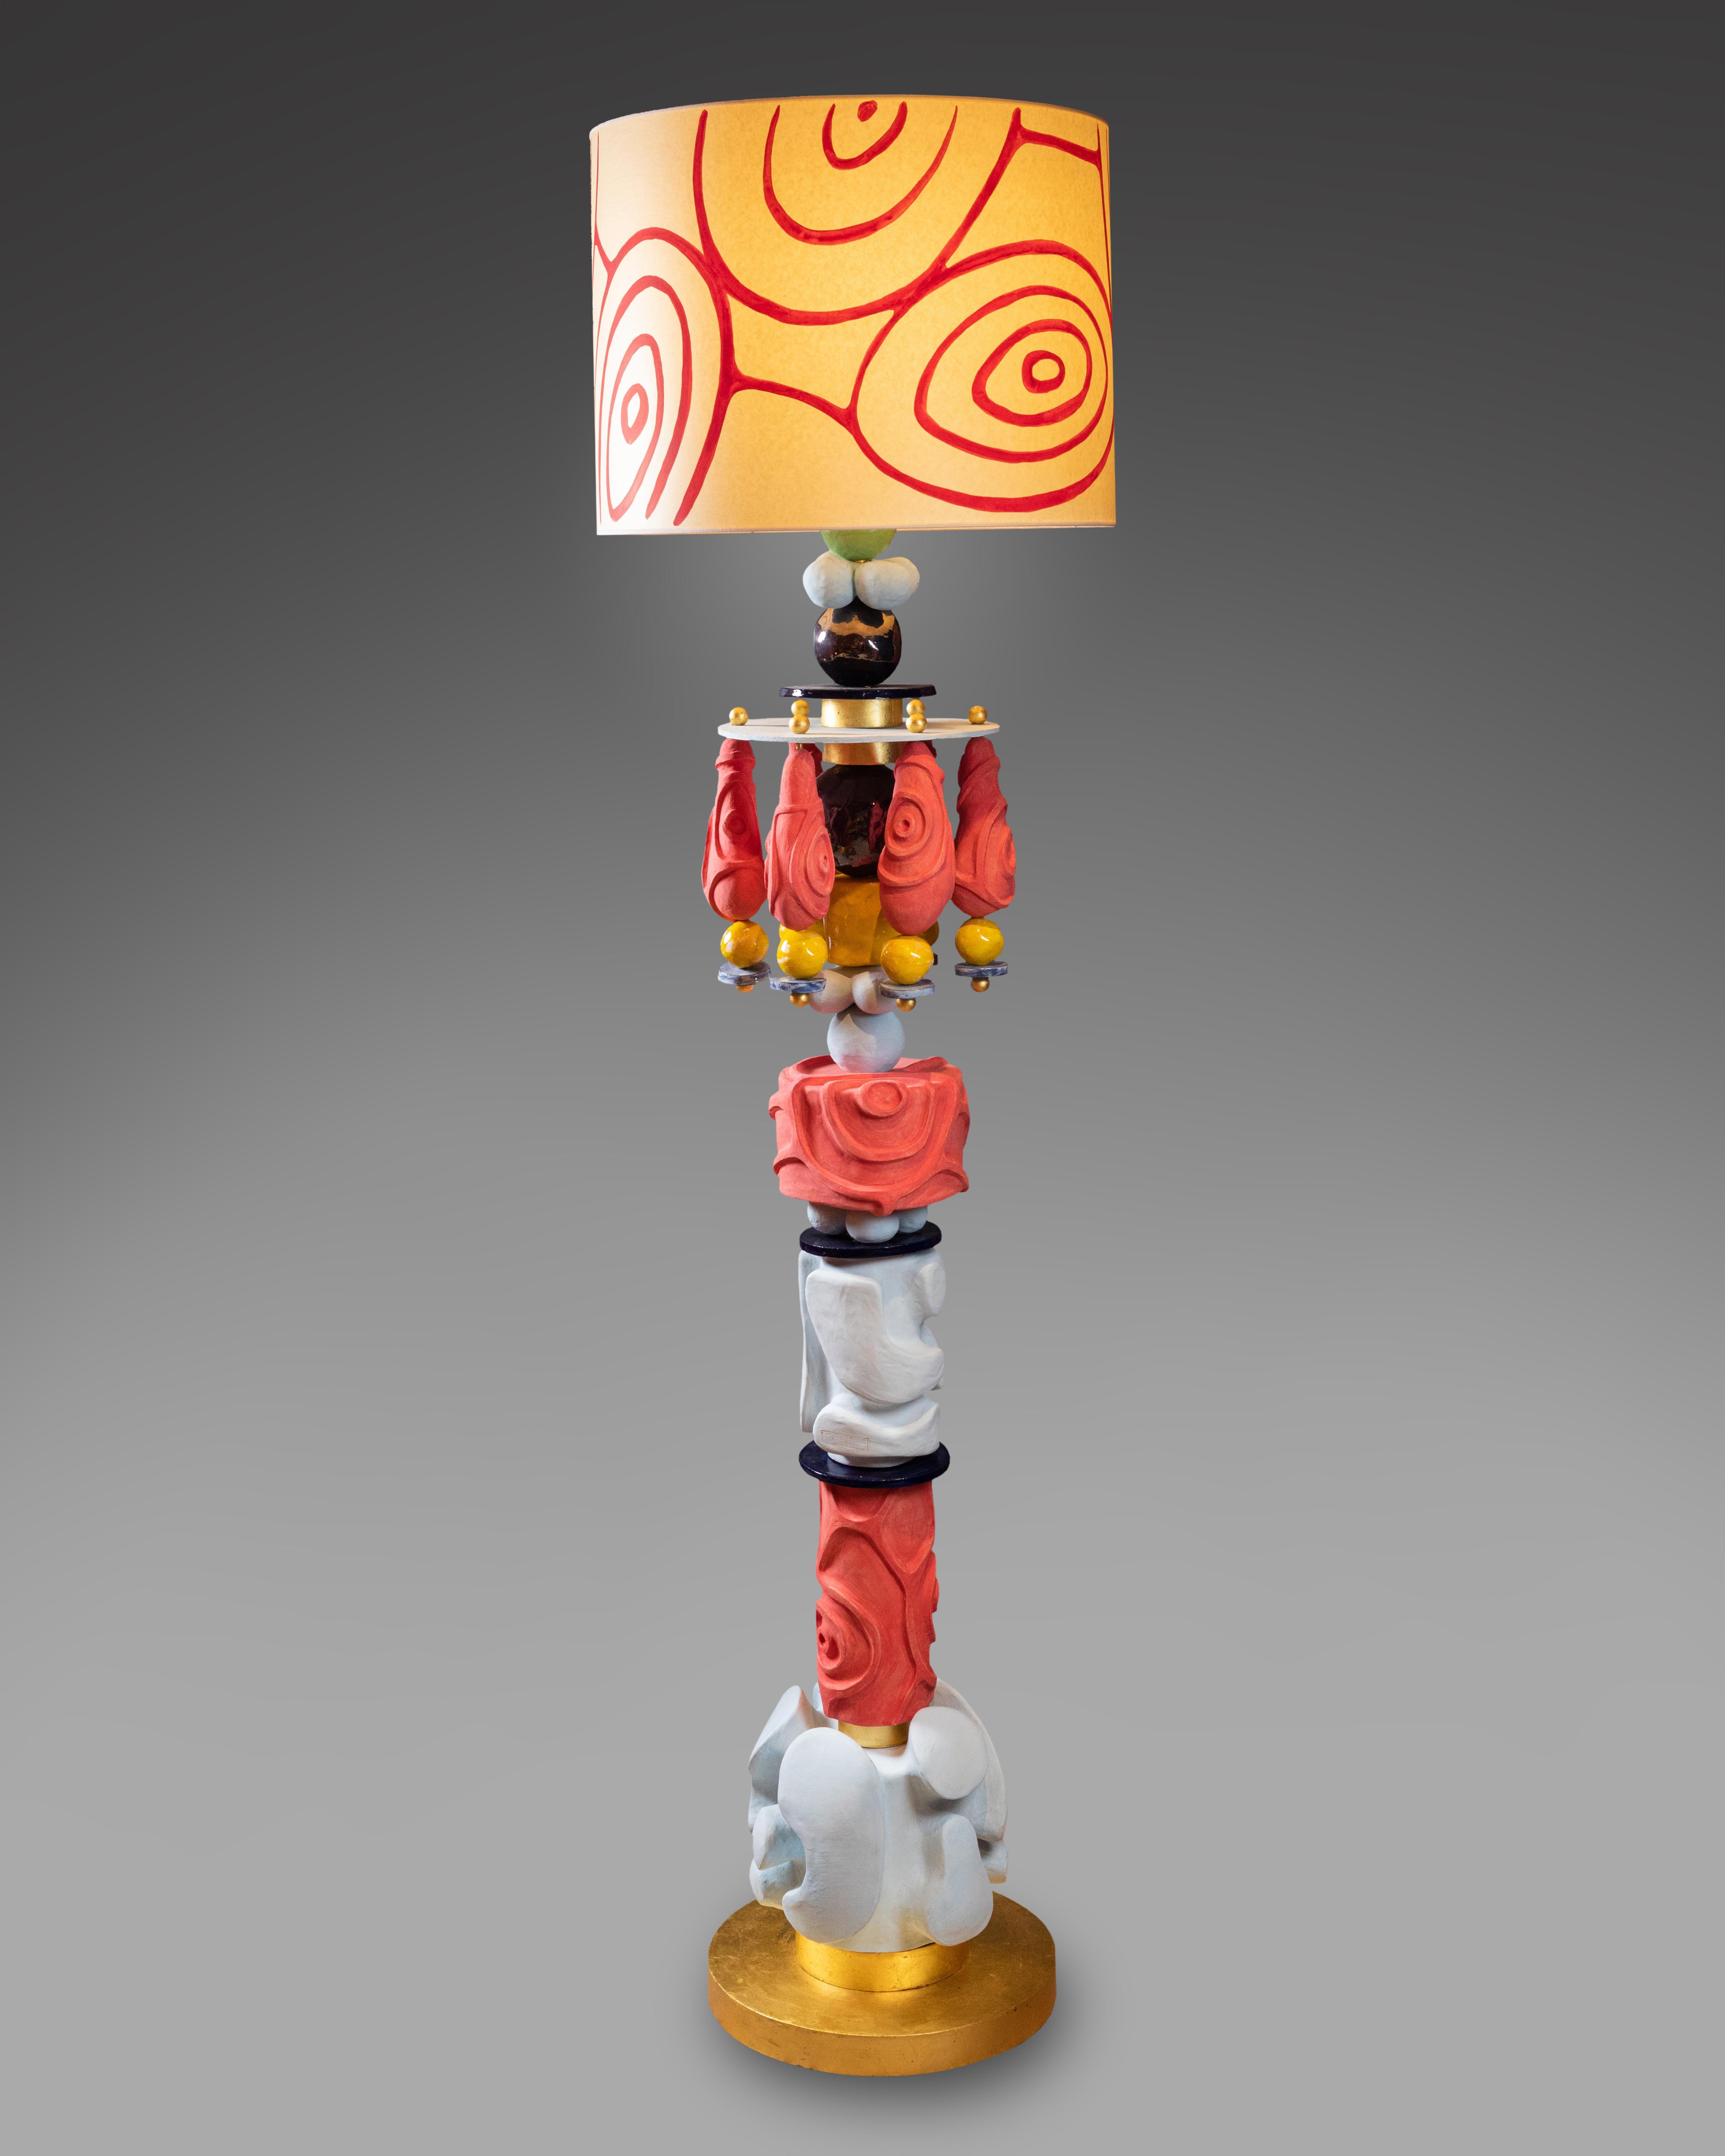 Alice Gavalet, unique high floor lamp La Pavlova, enameled ceramic, unique piece, signed. The base of the lamp is steel patinated with gold leaves.
With hand painted lampshade, lamp is H 194 cm, D 50 cm
Without hand painted lampshade, lamp is H